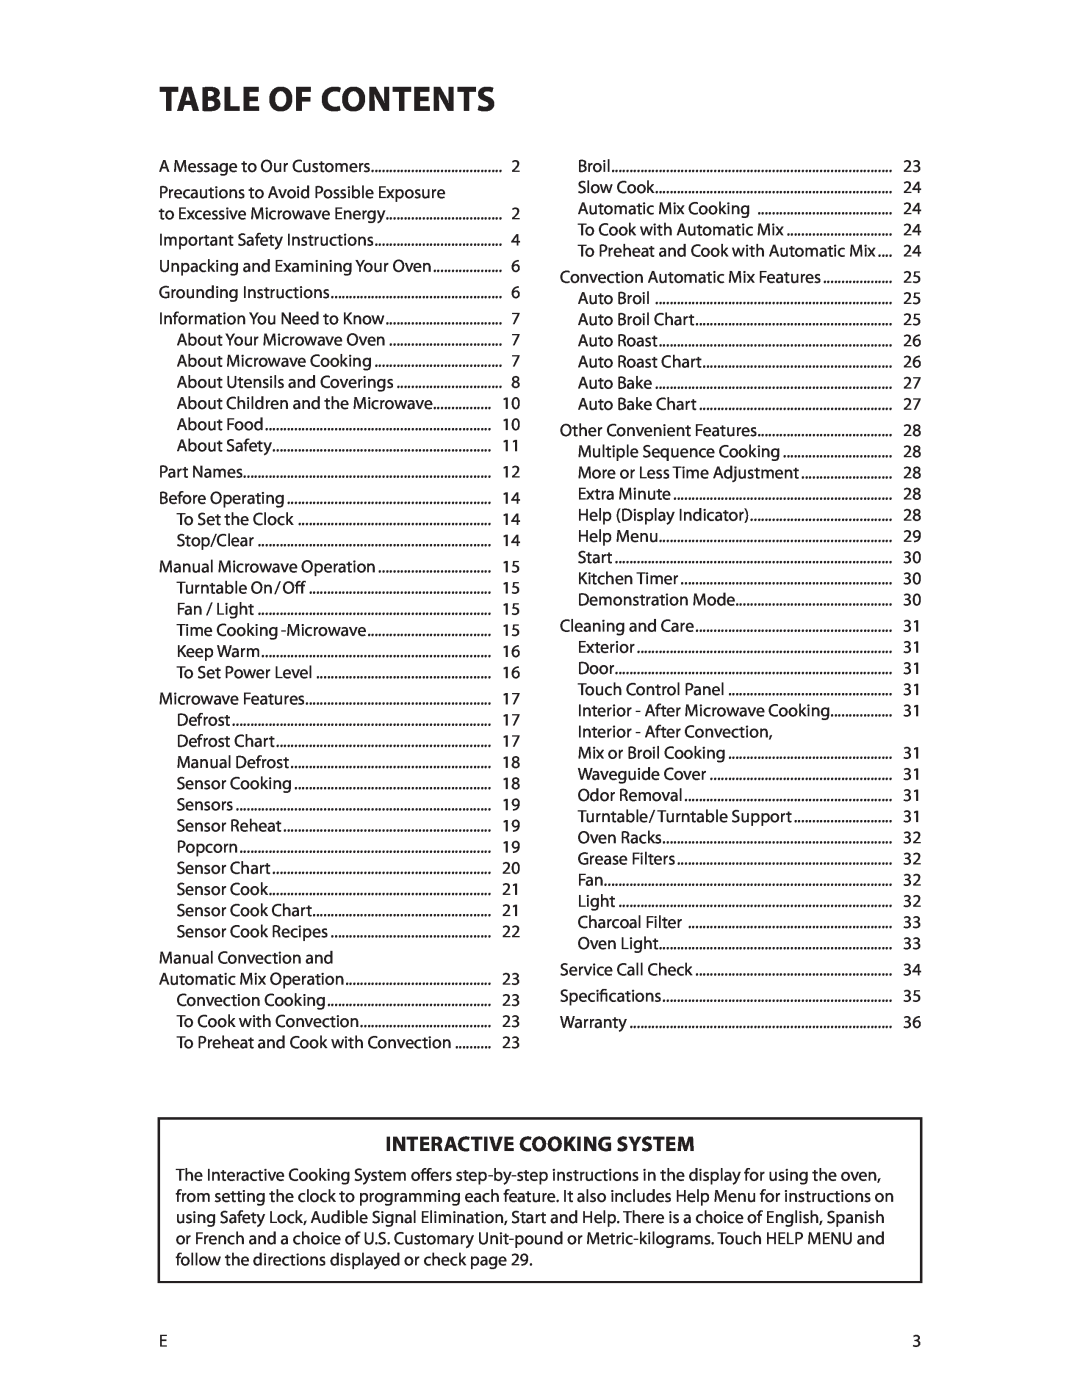 DCS CMOH30SS manual table of contents, Interactive Cooking System 